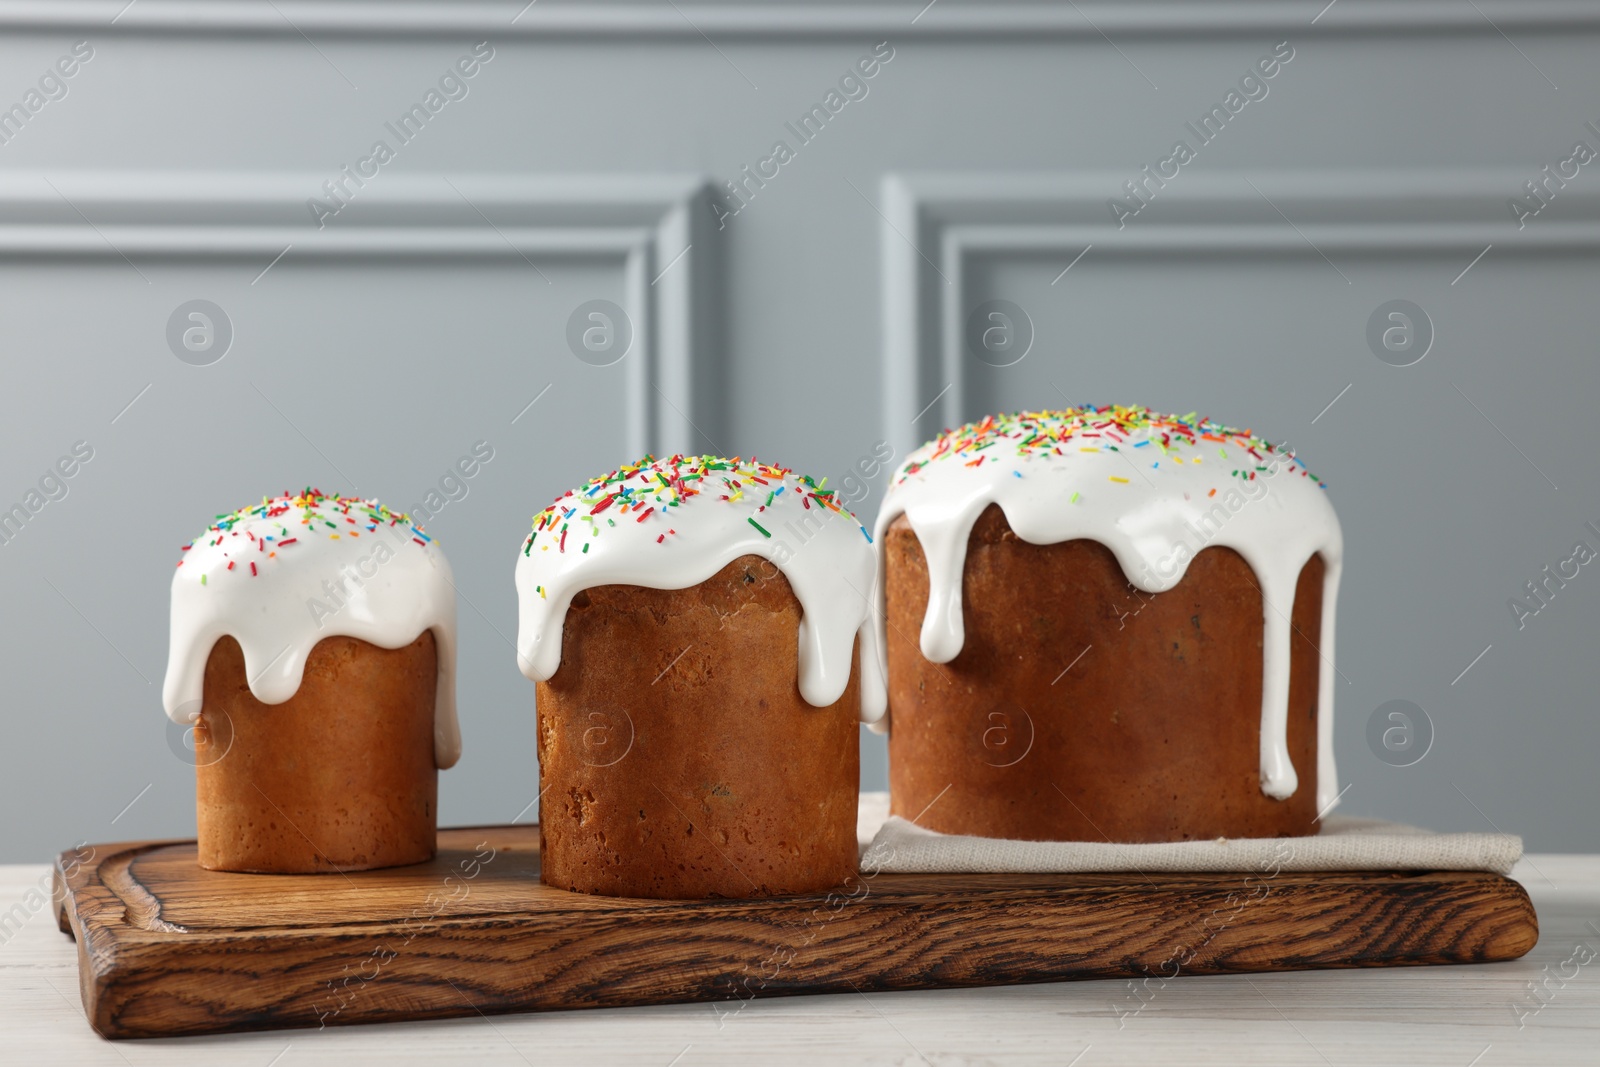 Photo of Delicious Easter cakes with sprinkles on white wooden table near light grey wall indoors